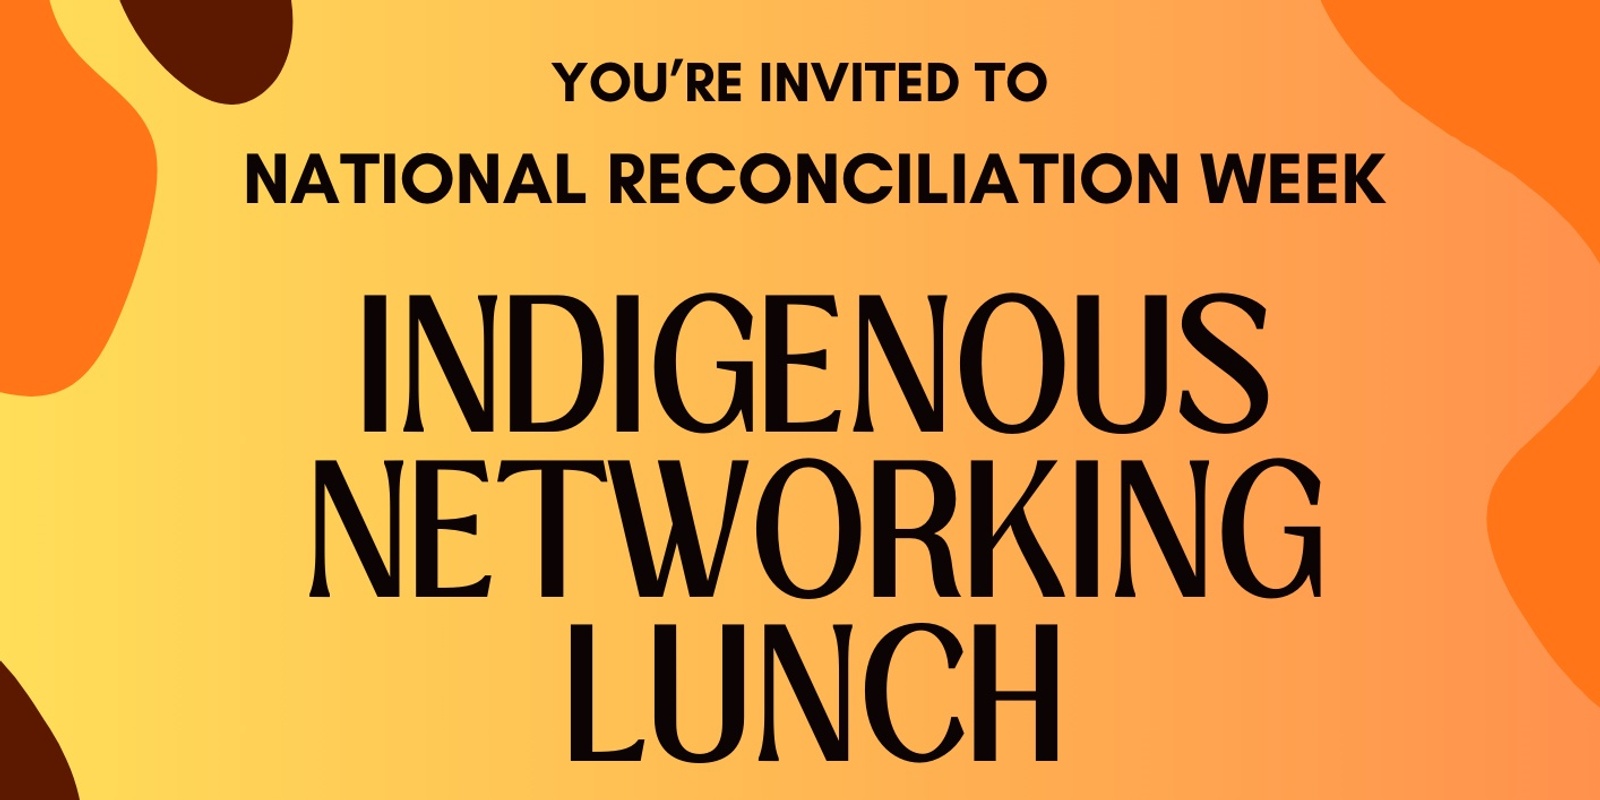 Banner image for Indigenous Networking Lunch